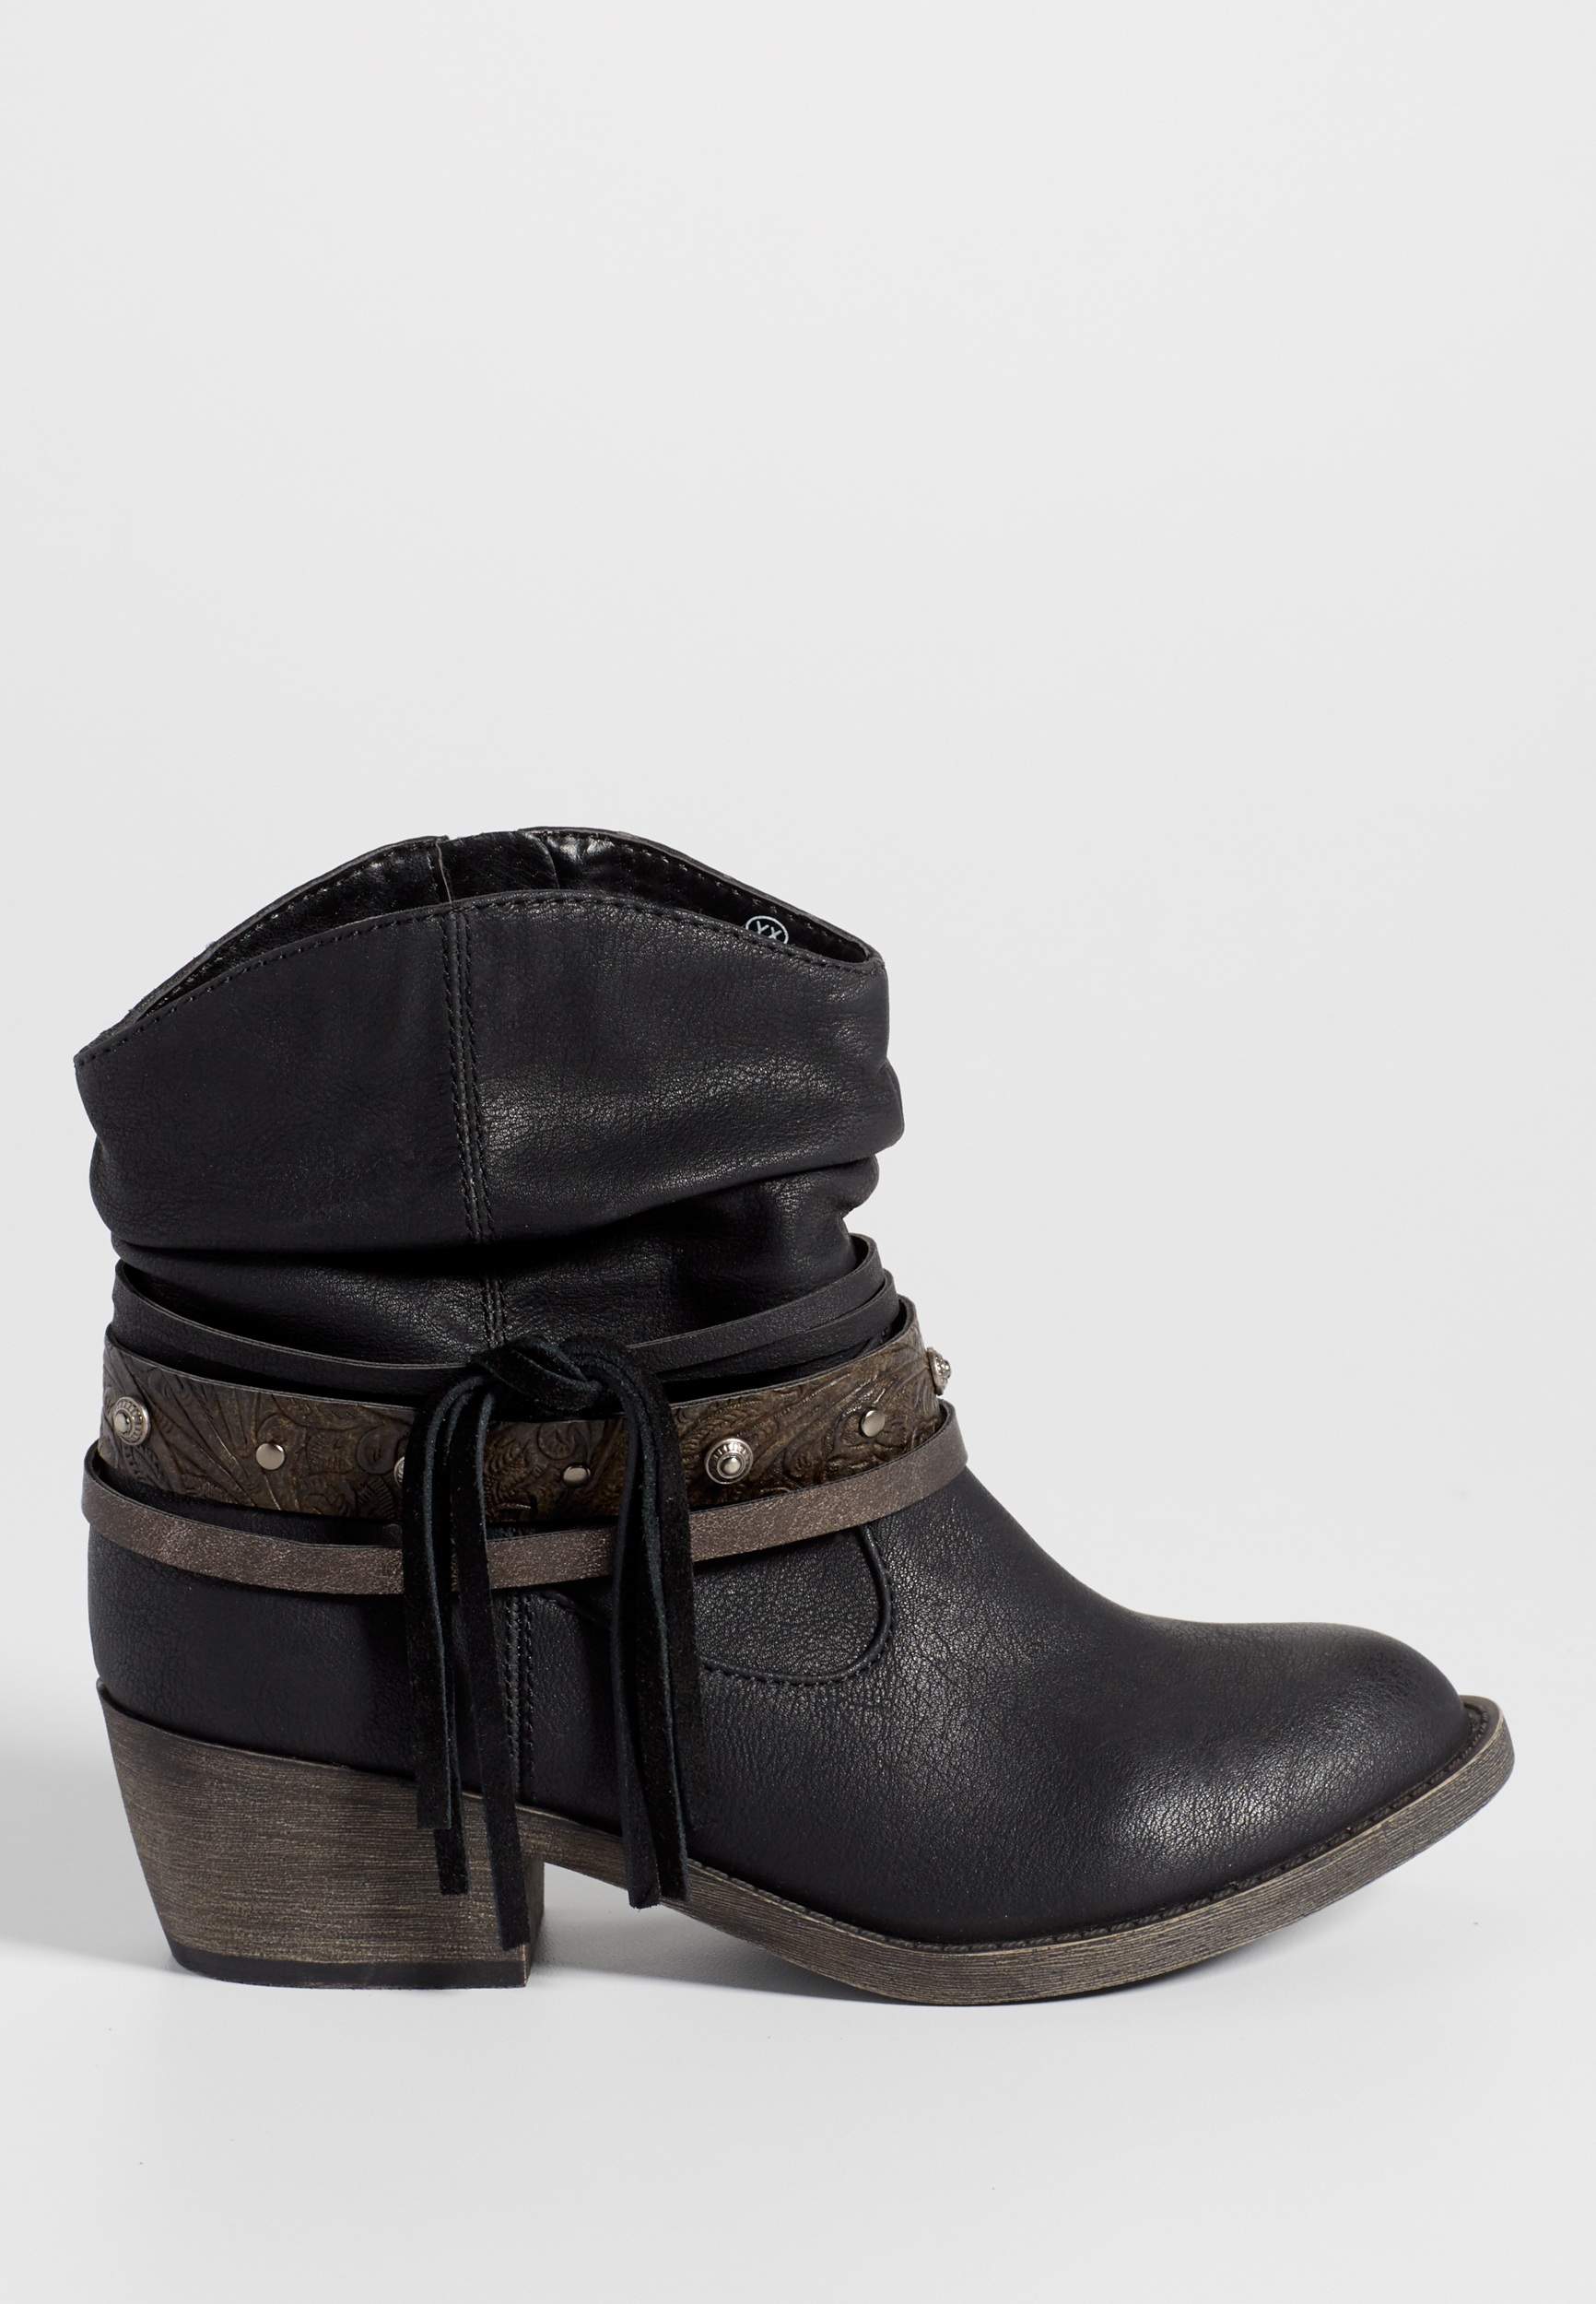 Joan western style ankle bootie in black | maurices